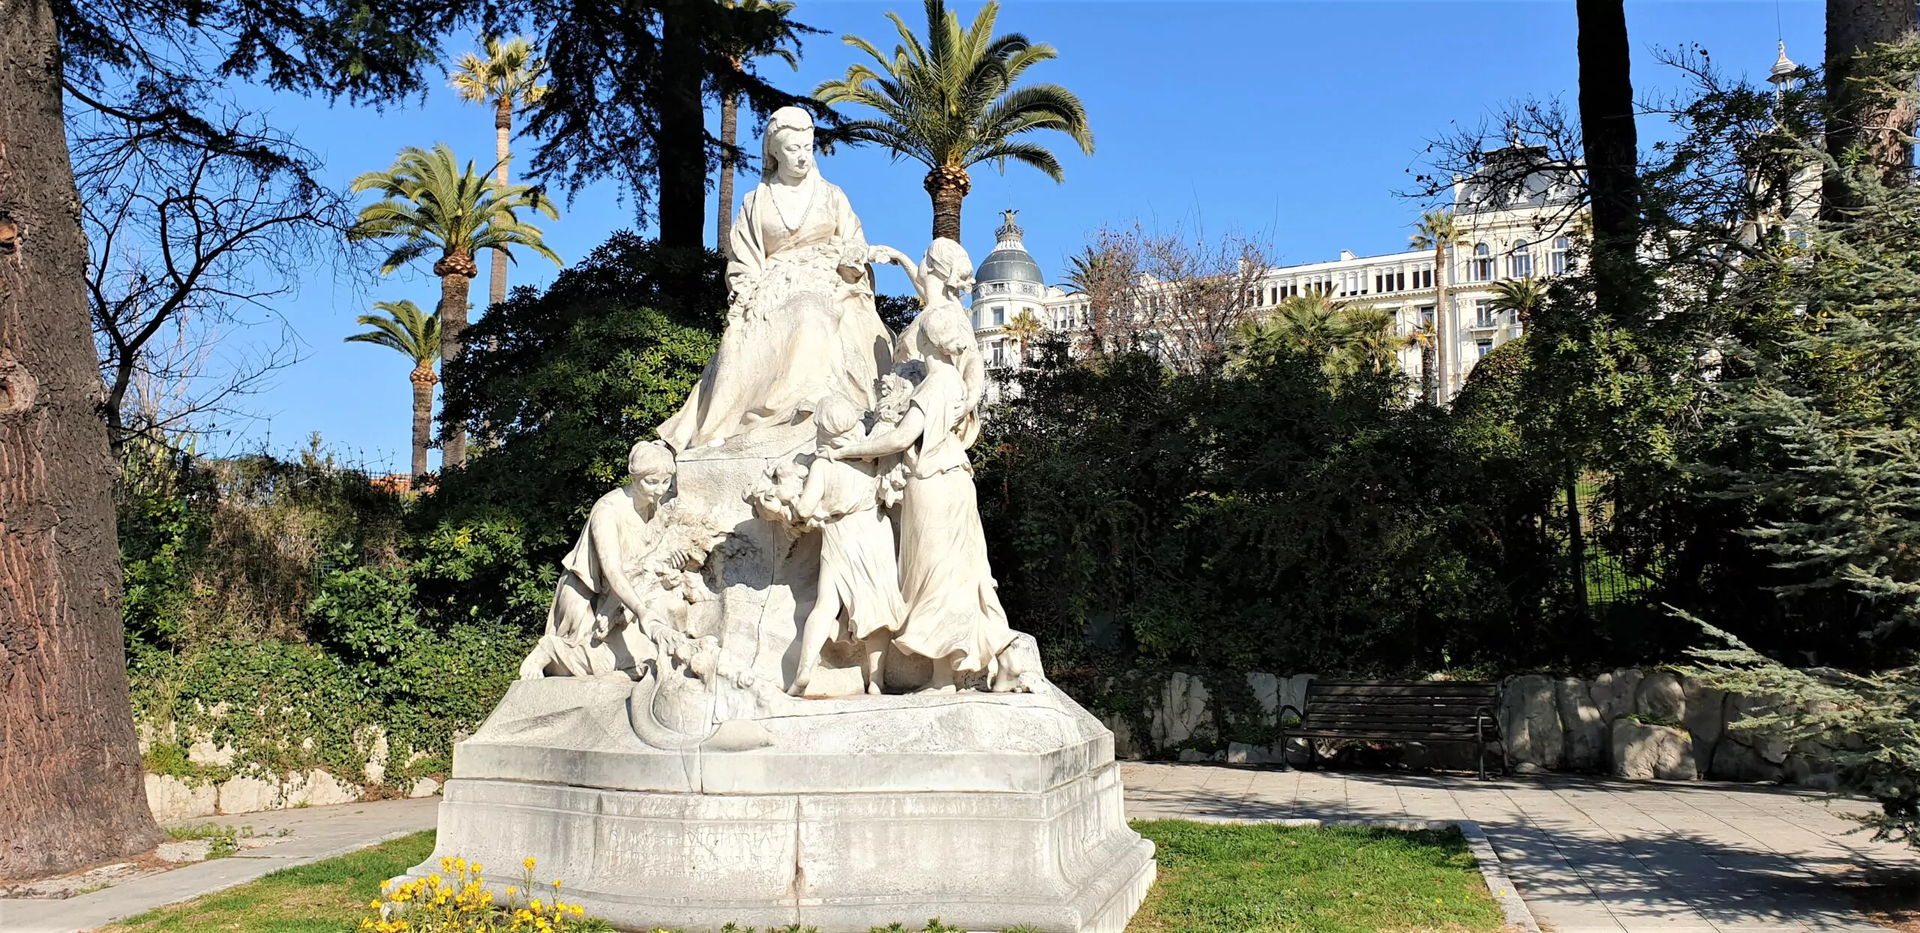 Queen-Victoria-on-the-French-Riviera-scaled.jpg